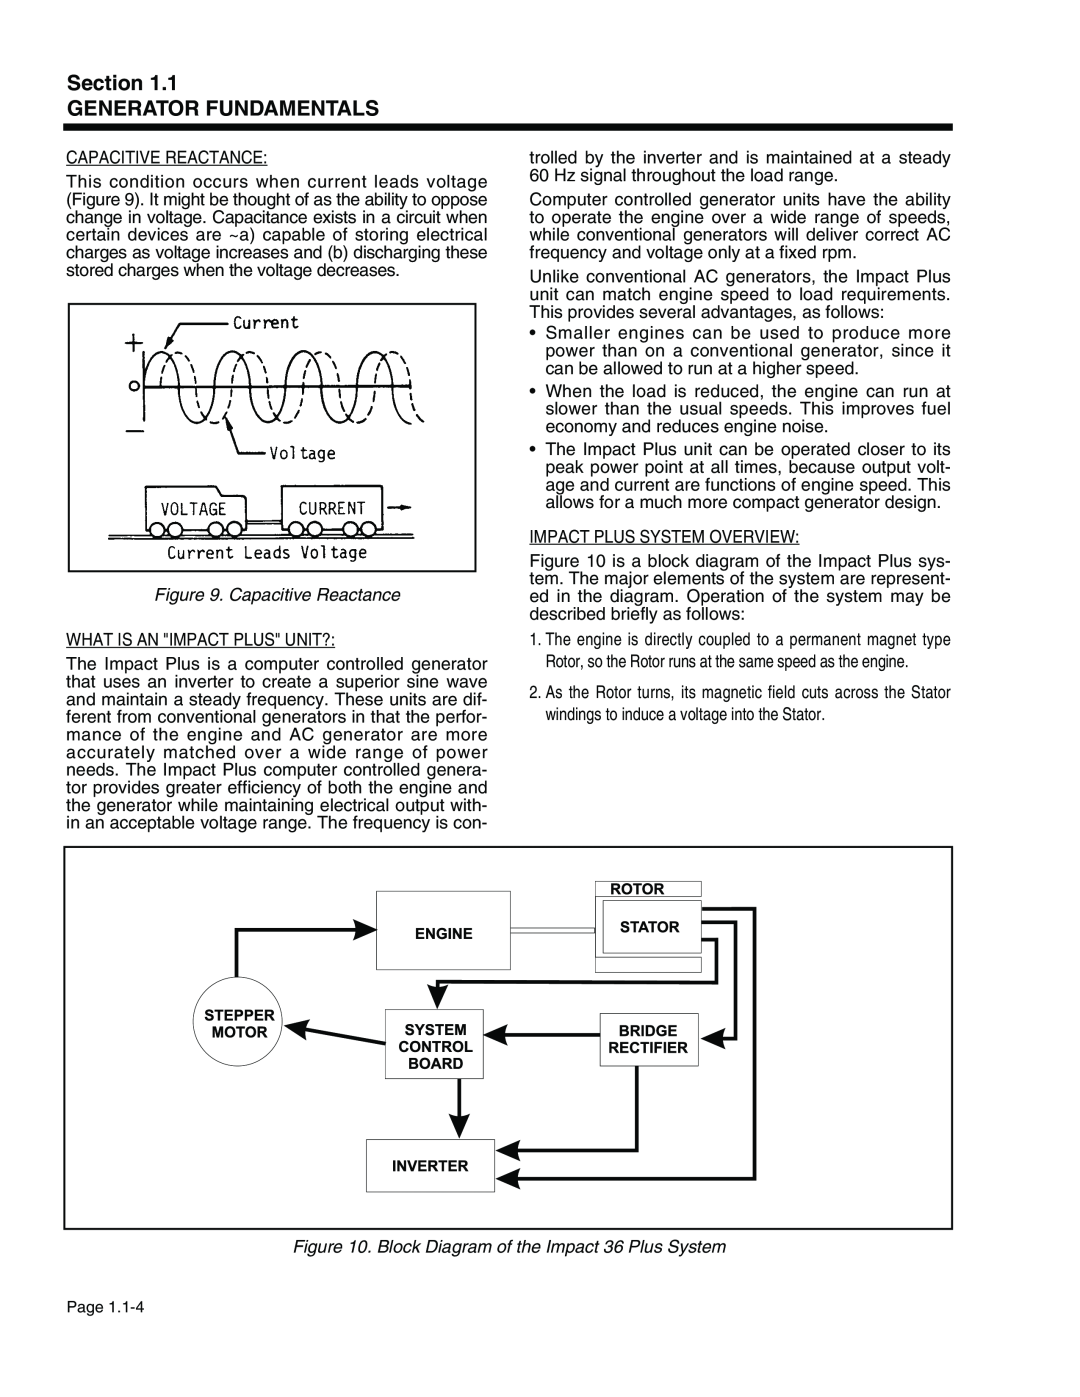 Generac Power Systems 940-2, 941-2 service manual Capacitive Reactance, Block Diagram of the Impact 36 Plus System 